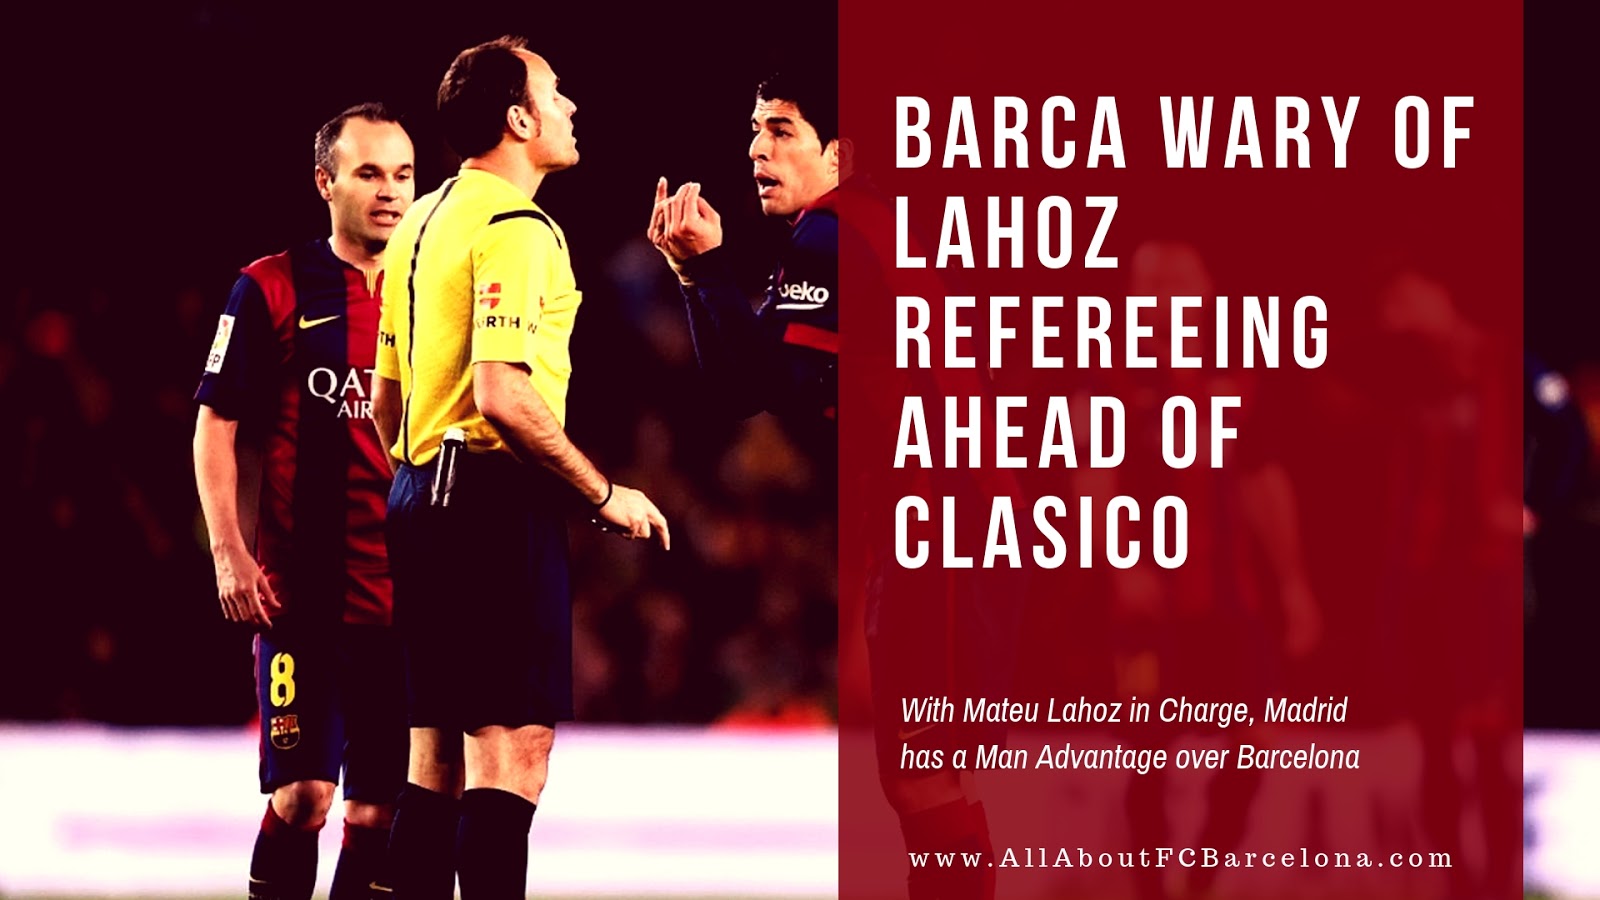 With Mateu Lahoz in Charge, Madrid has a Man Advantage over Barcelona!